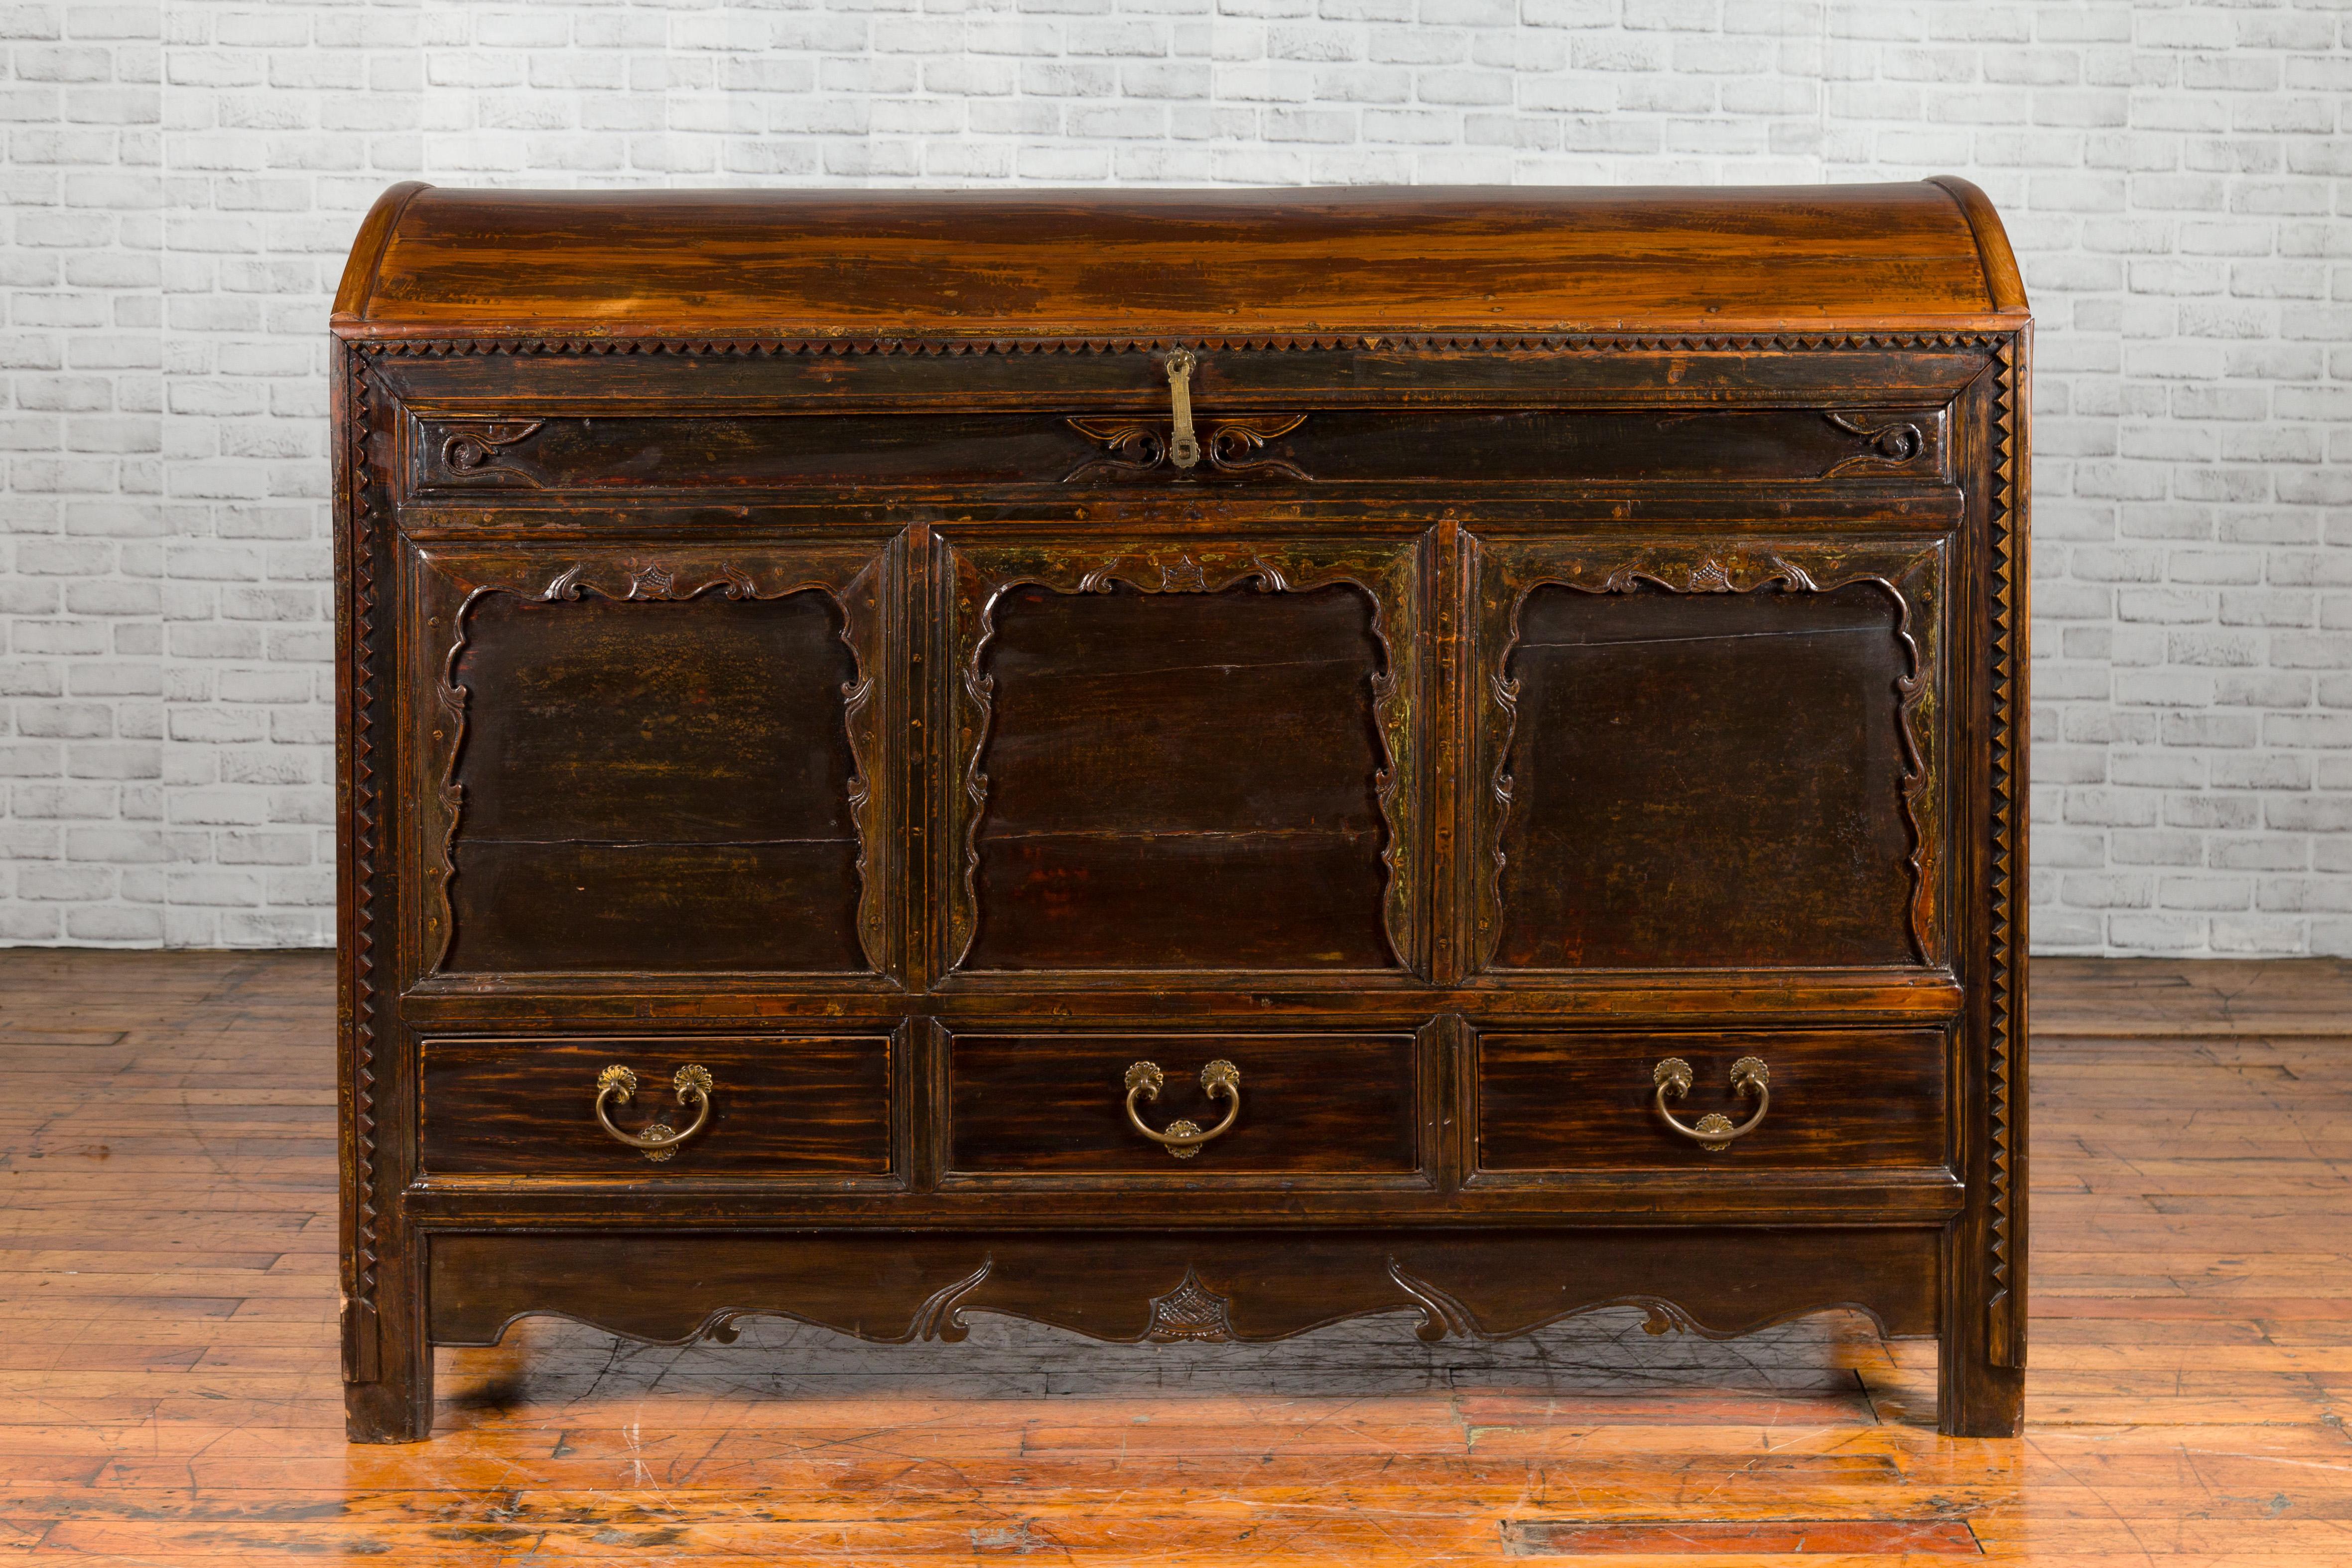 A Chinese antique dowry chest from the early 20th century, with carved panels, three drawers and scalloped skirt. Created in China during the early years of the 20th century, this dowry chest features a dark patina perfectly complimenting the